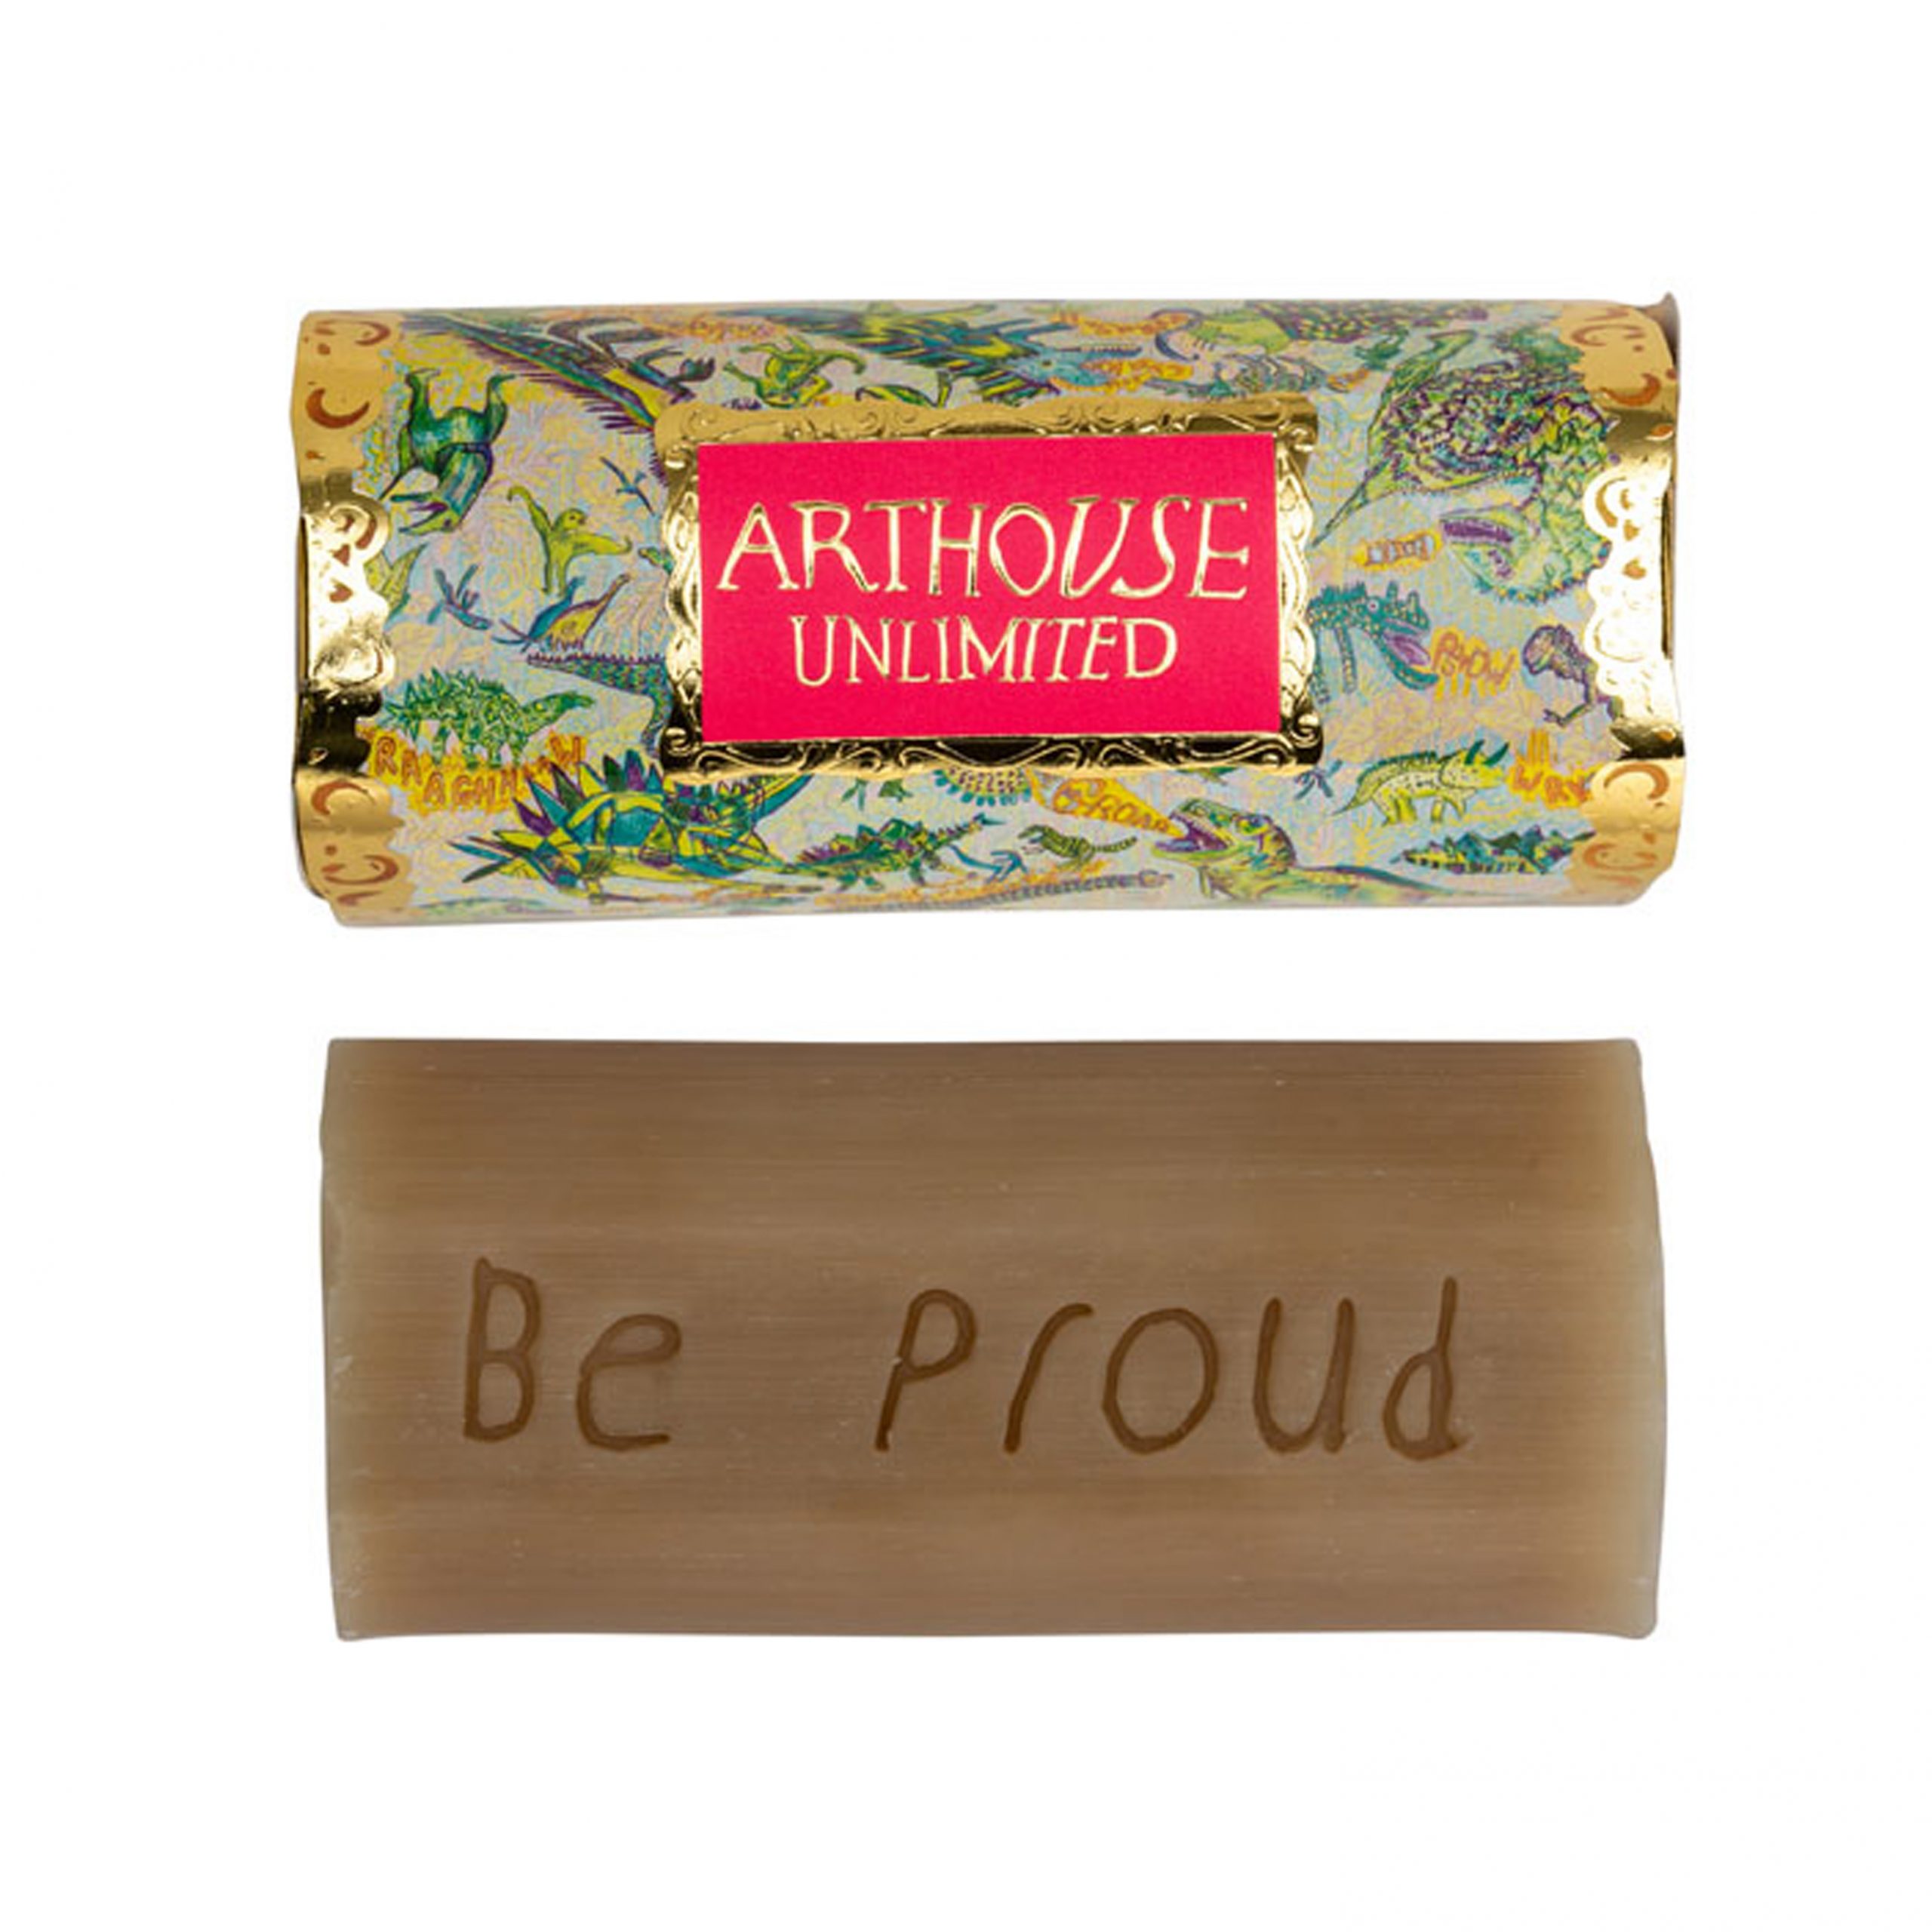 ARTHOUSE Unlimited 150g Rhubarb and Ginger Organic Soap